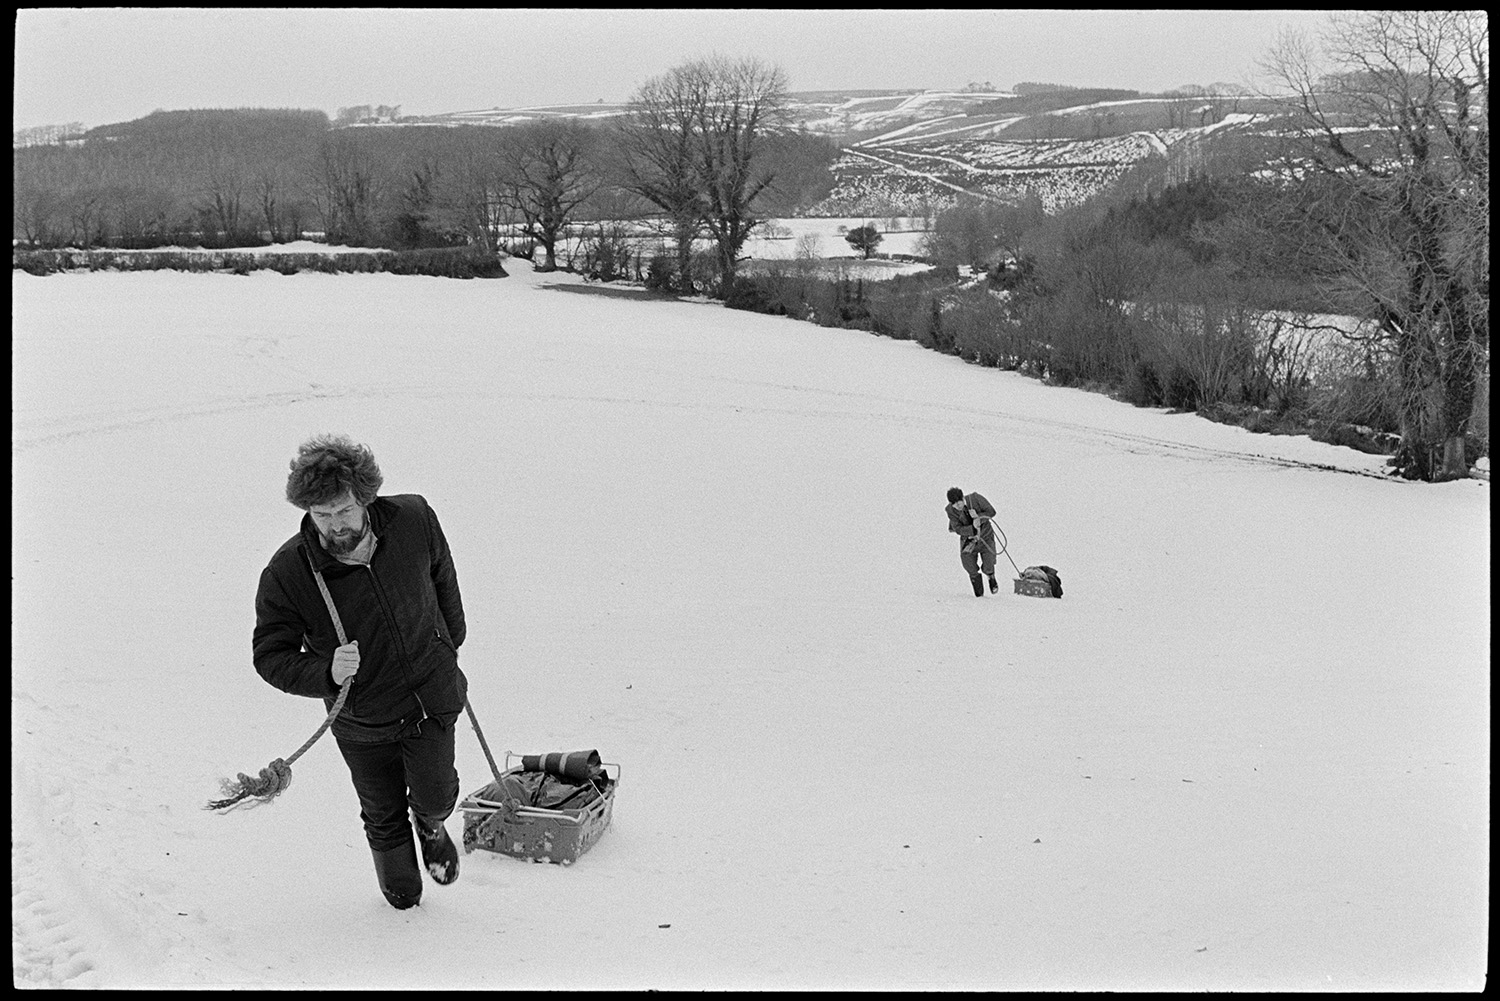 Snow, butcher setting off with meat on sledge for next village, Merton cut off. 
[Bill Davey and another man dragging sledges with meat through a snow covered field at Langham, Dolton. They are going to deliver the meat to Merton which was cut off in the snow. A landscape of snow covered fields and trees can be seen in the background.]